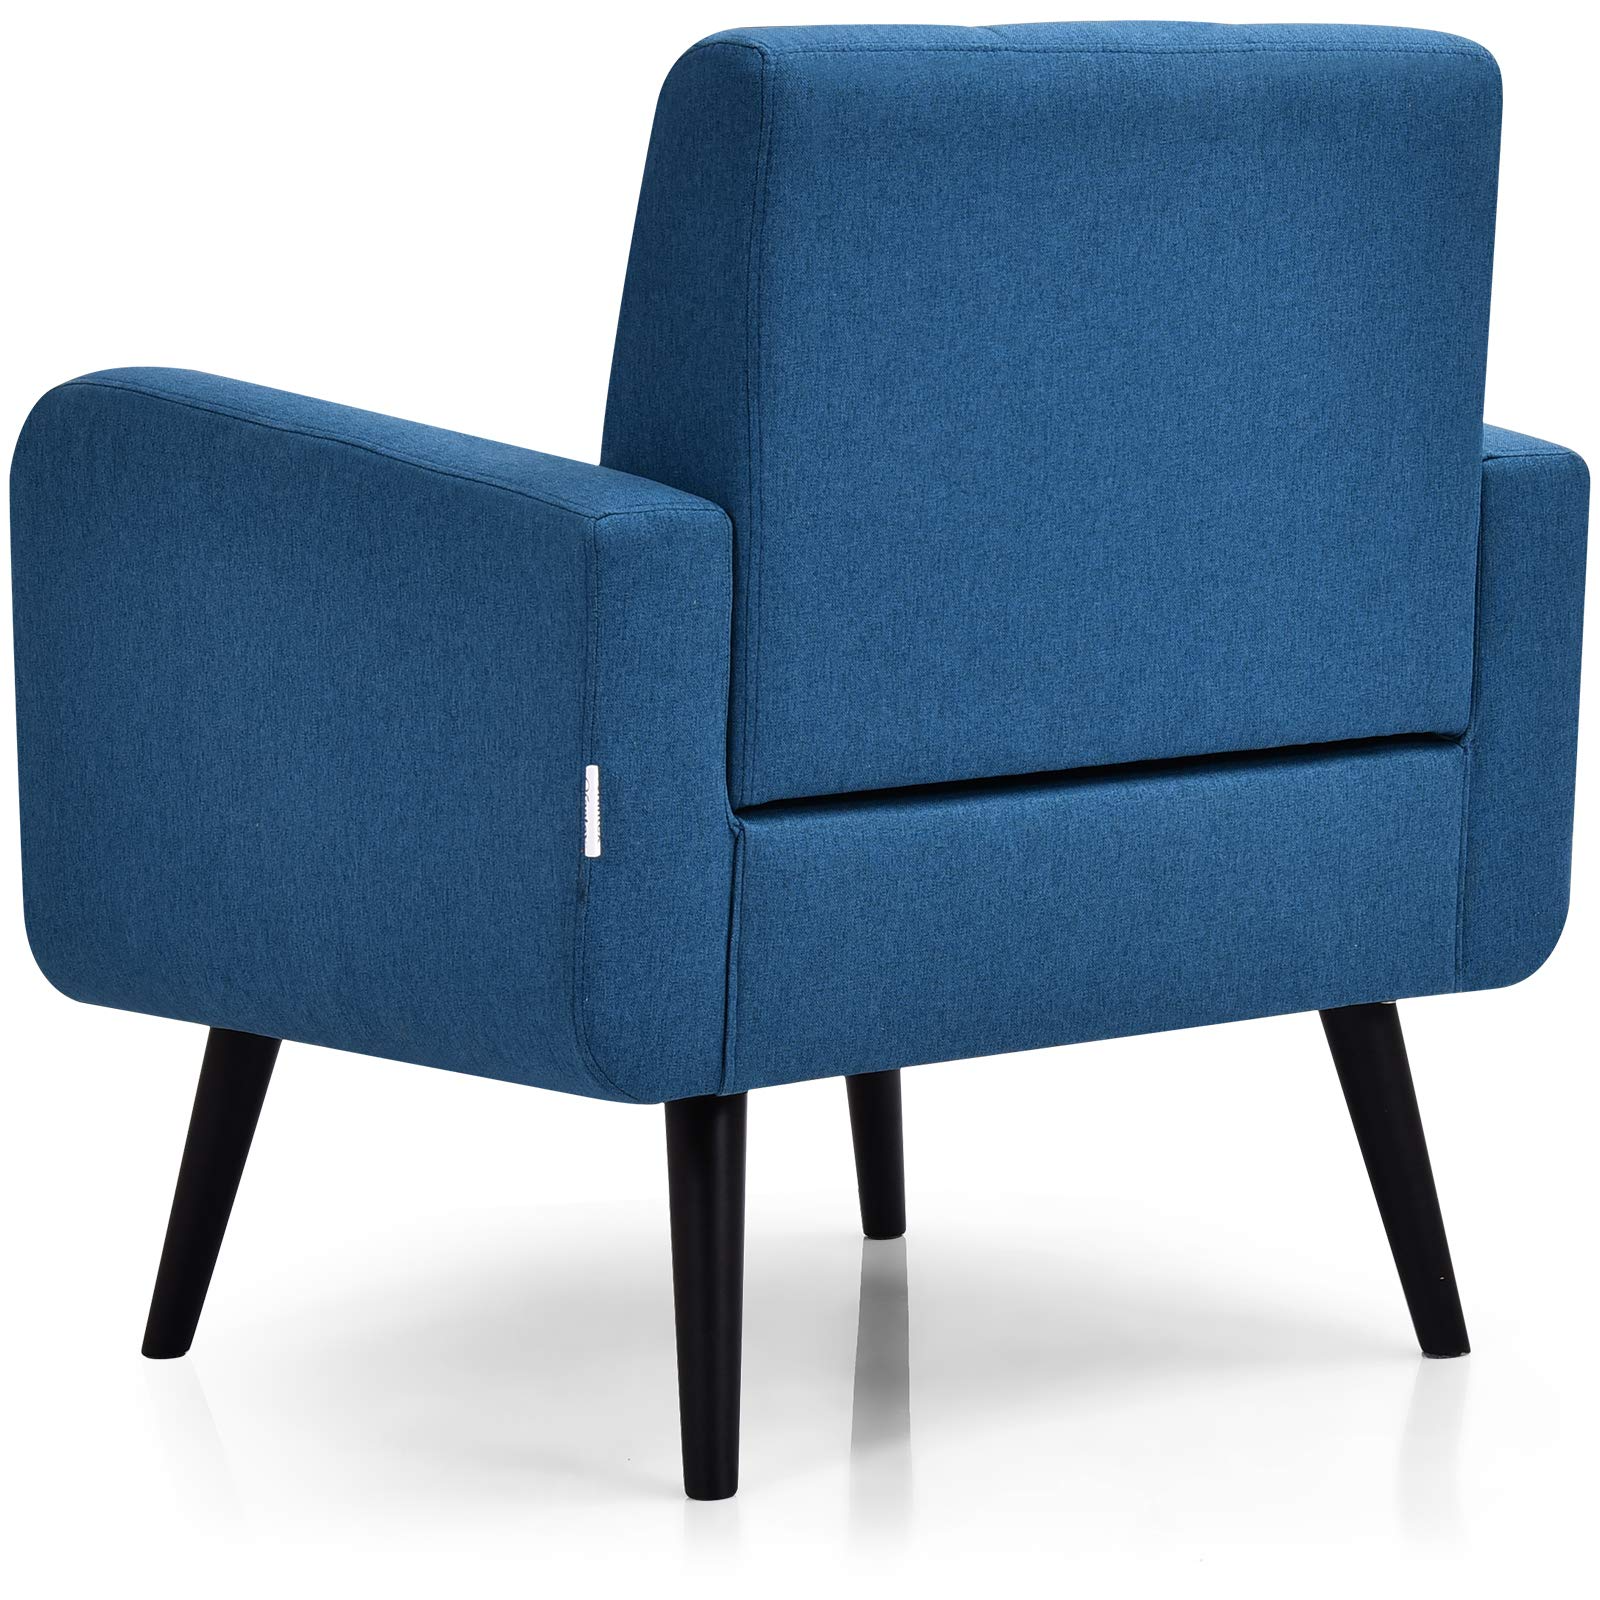 Giantex Set of 2 Modern Upholstered Accent Chairs